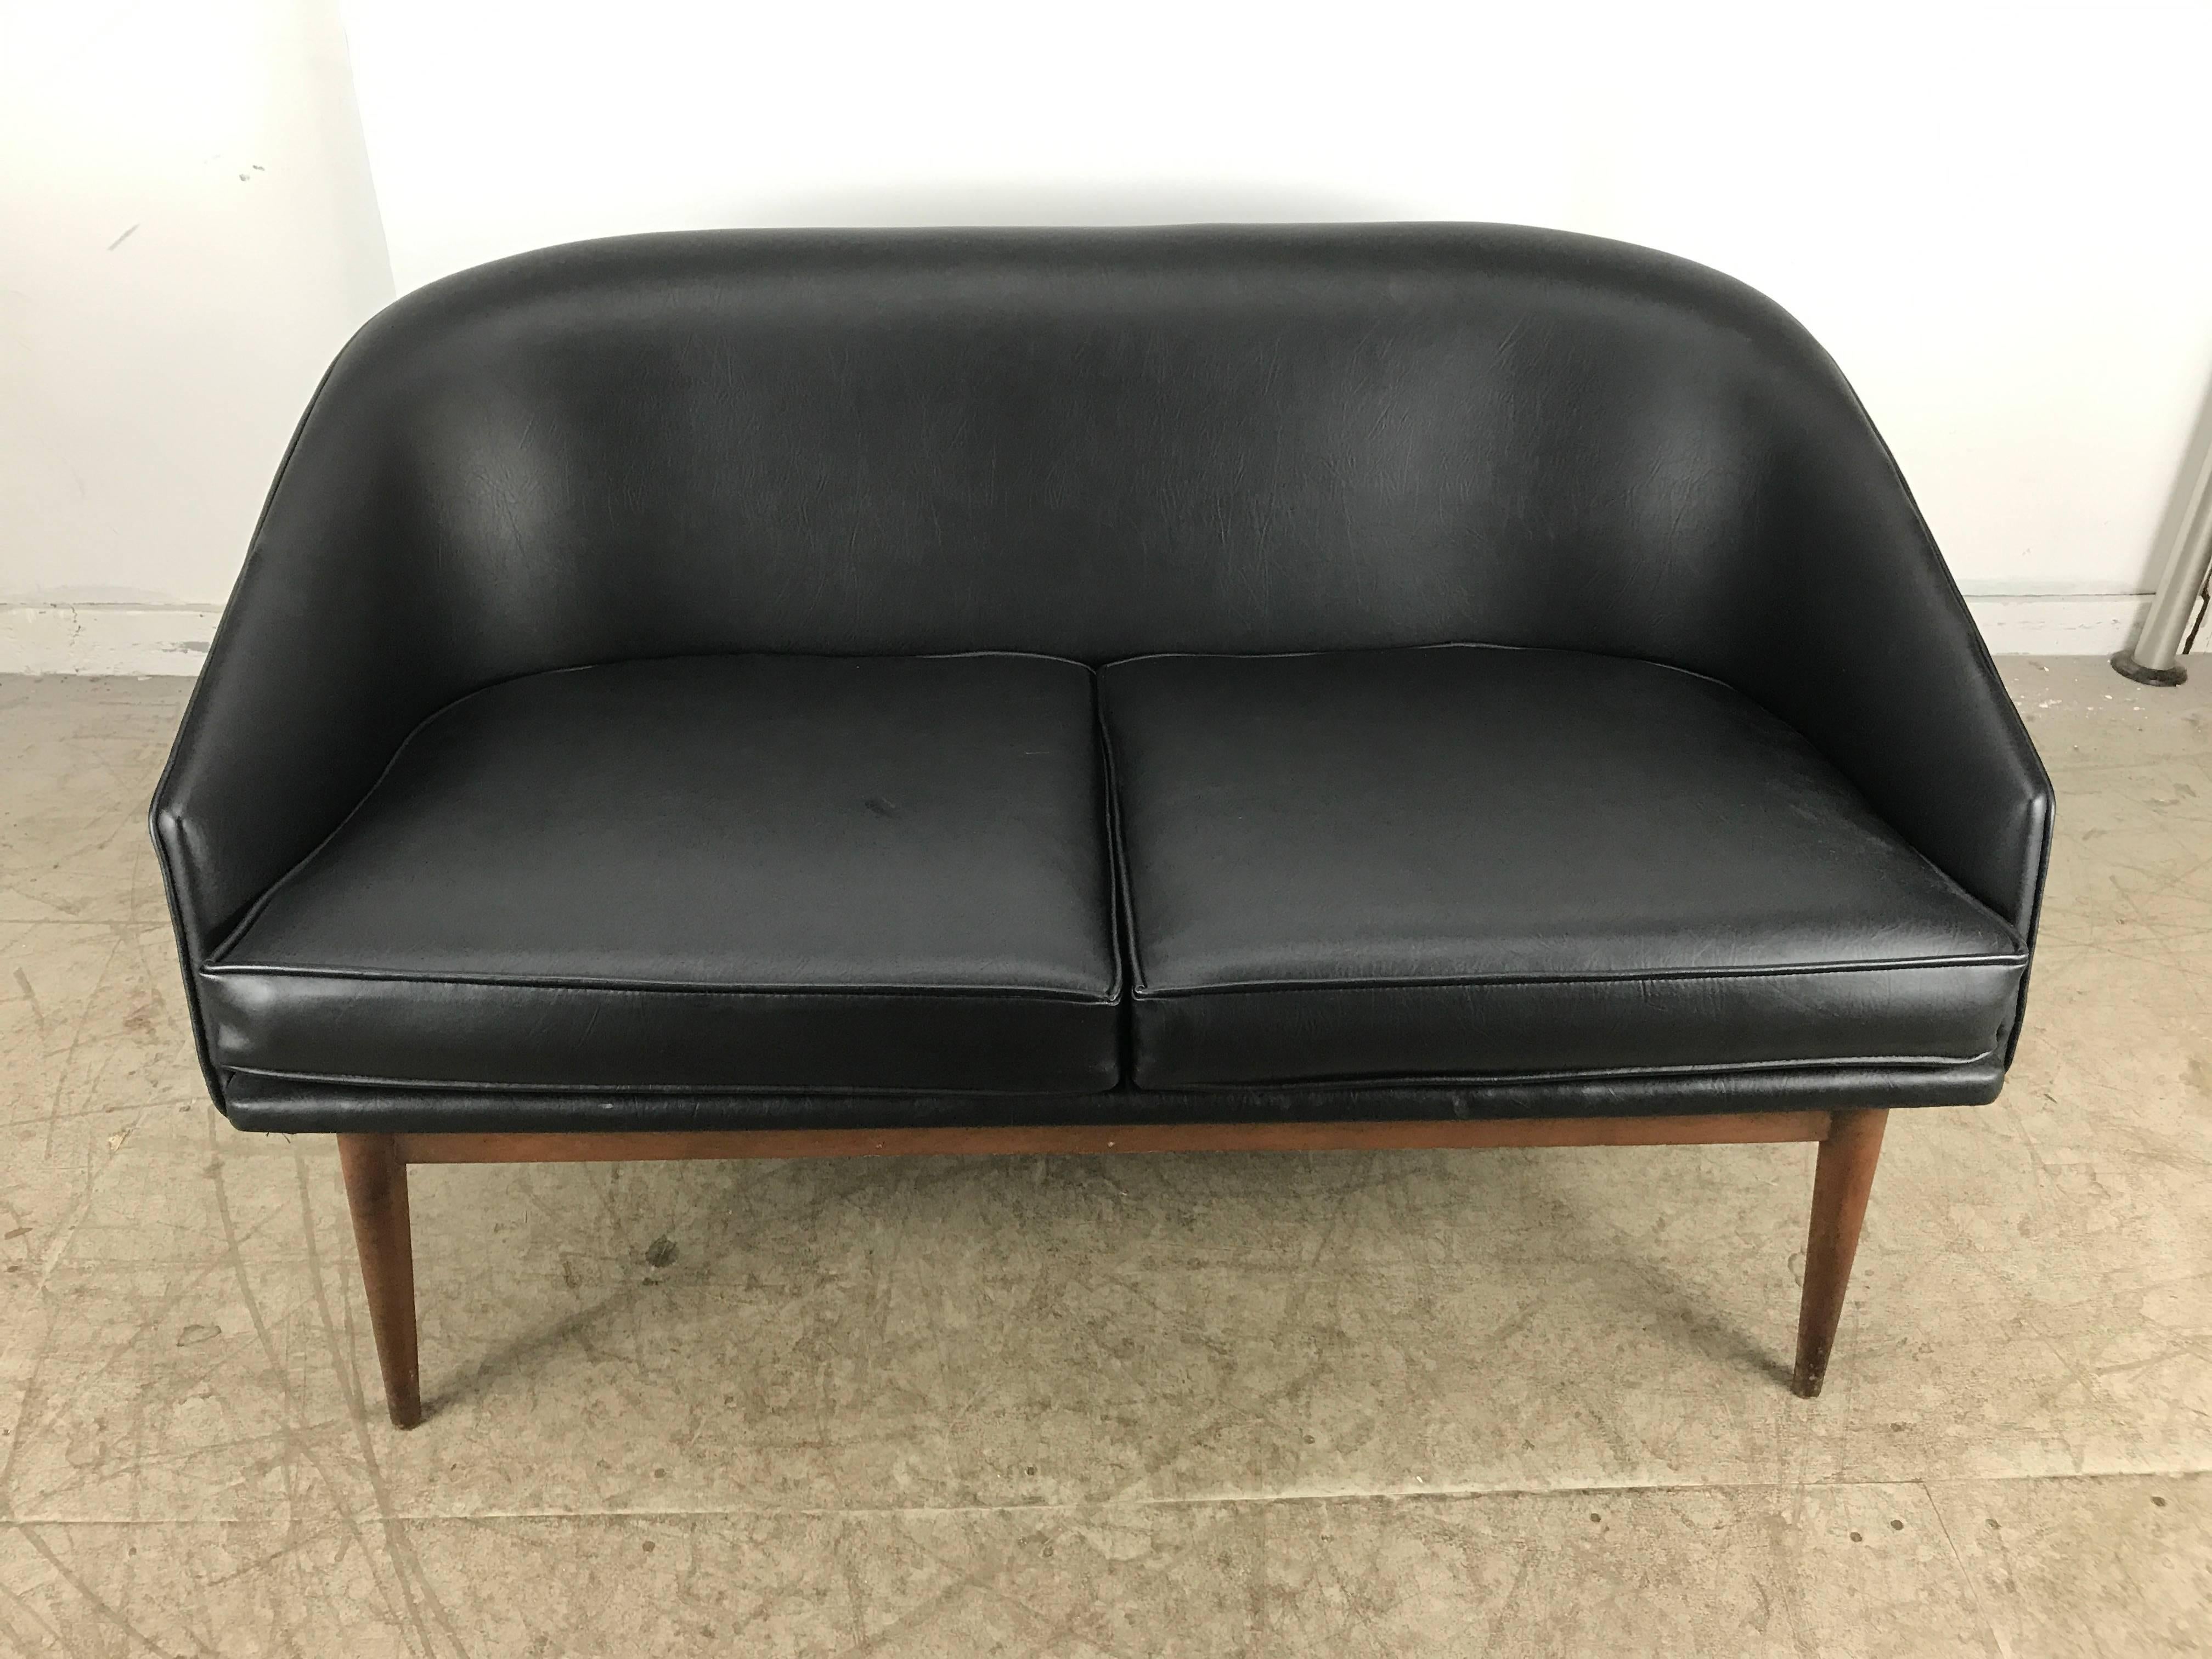 Classic Danish Modern two-seat sofa attributed to Arne Hovmand Olsen, Denmark, Recently reupholstered in a black Naugahyde, quality, sturdy teak base, extremely comfortable and stylish, hand delivery avail to New York City of anywhere enroute from